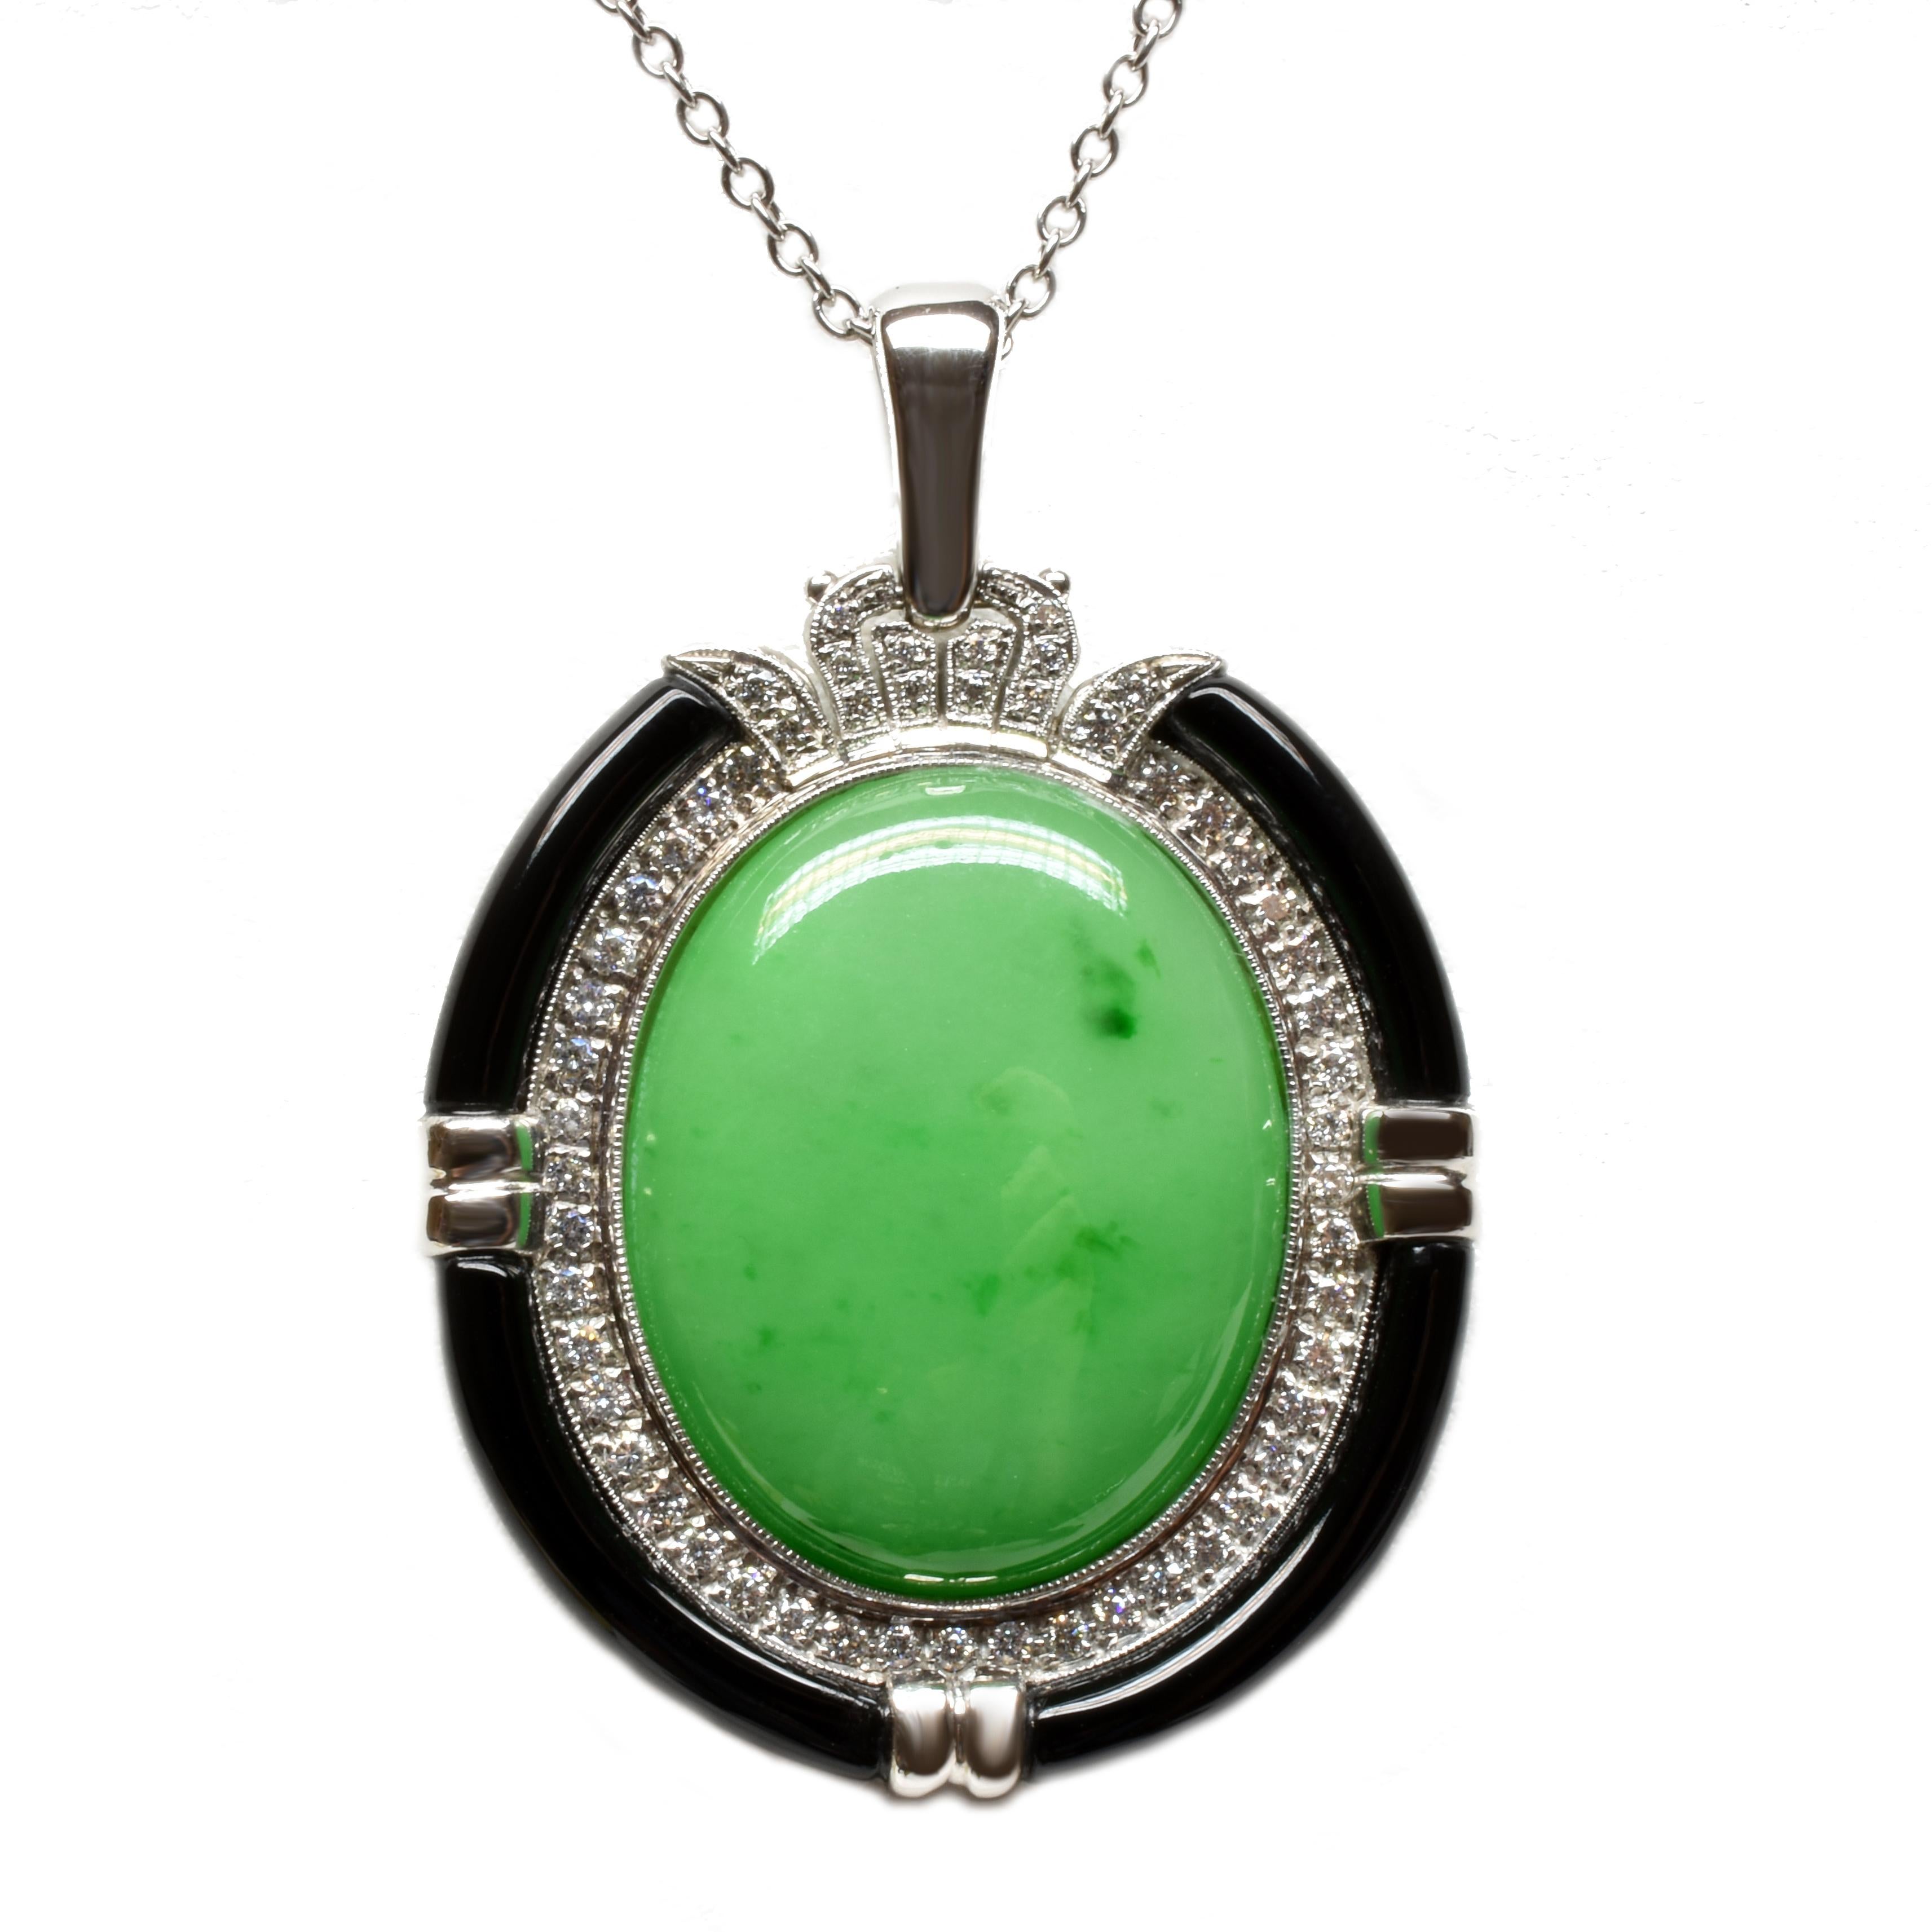 Gilberto Cassola 18Kt White Gold Pendant with an Oval Cushon Cut Green Jadeite, Black Onix and White Diamonds.
Unique Piece Handmade in our Atelier in Valenza Italy.
This beautiful Jadeite has a very nice bright green colour. Diamonds are with